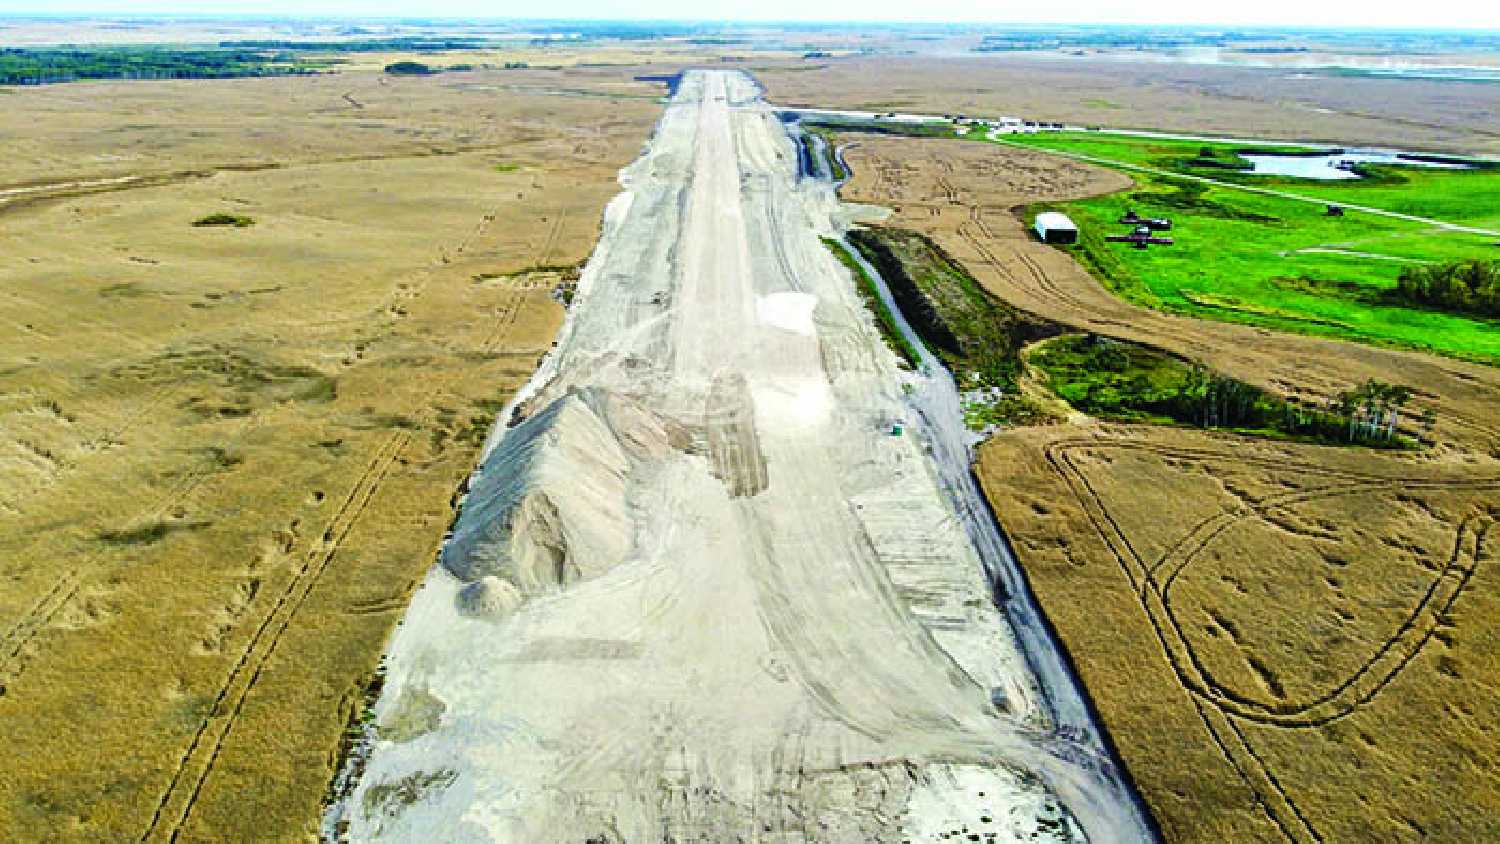 Work continues on the Moosomin airport expansion project. The new runway is oriented northwest-southeast in line with the prevailing winds.